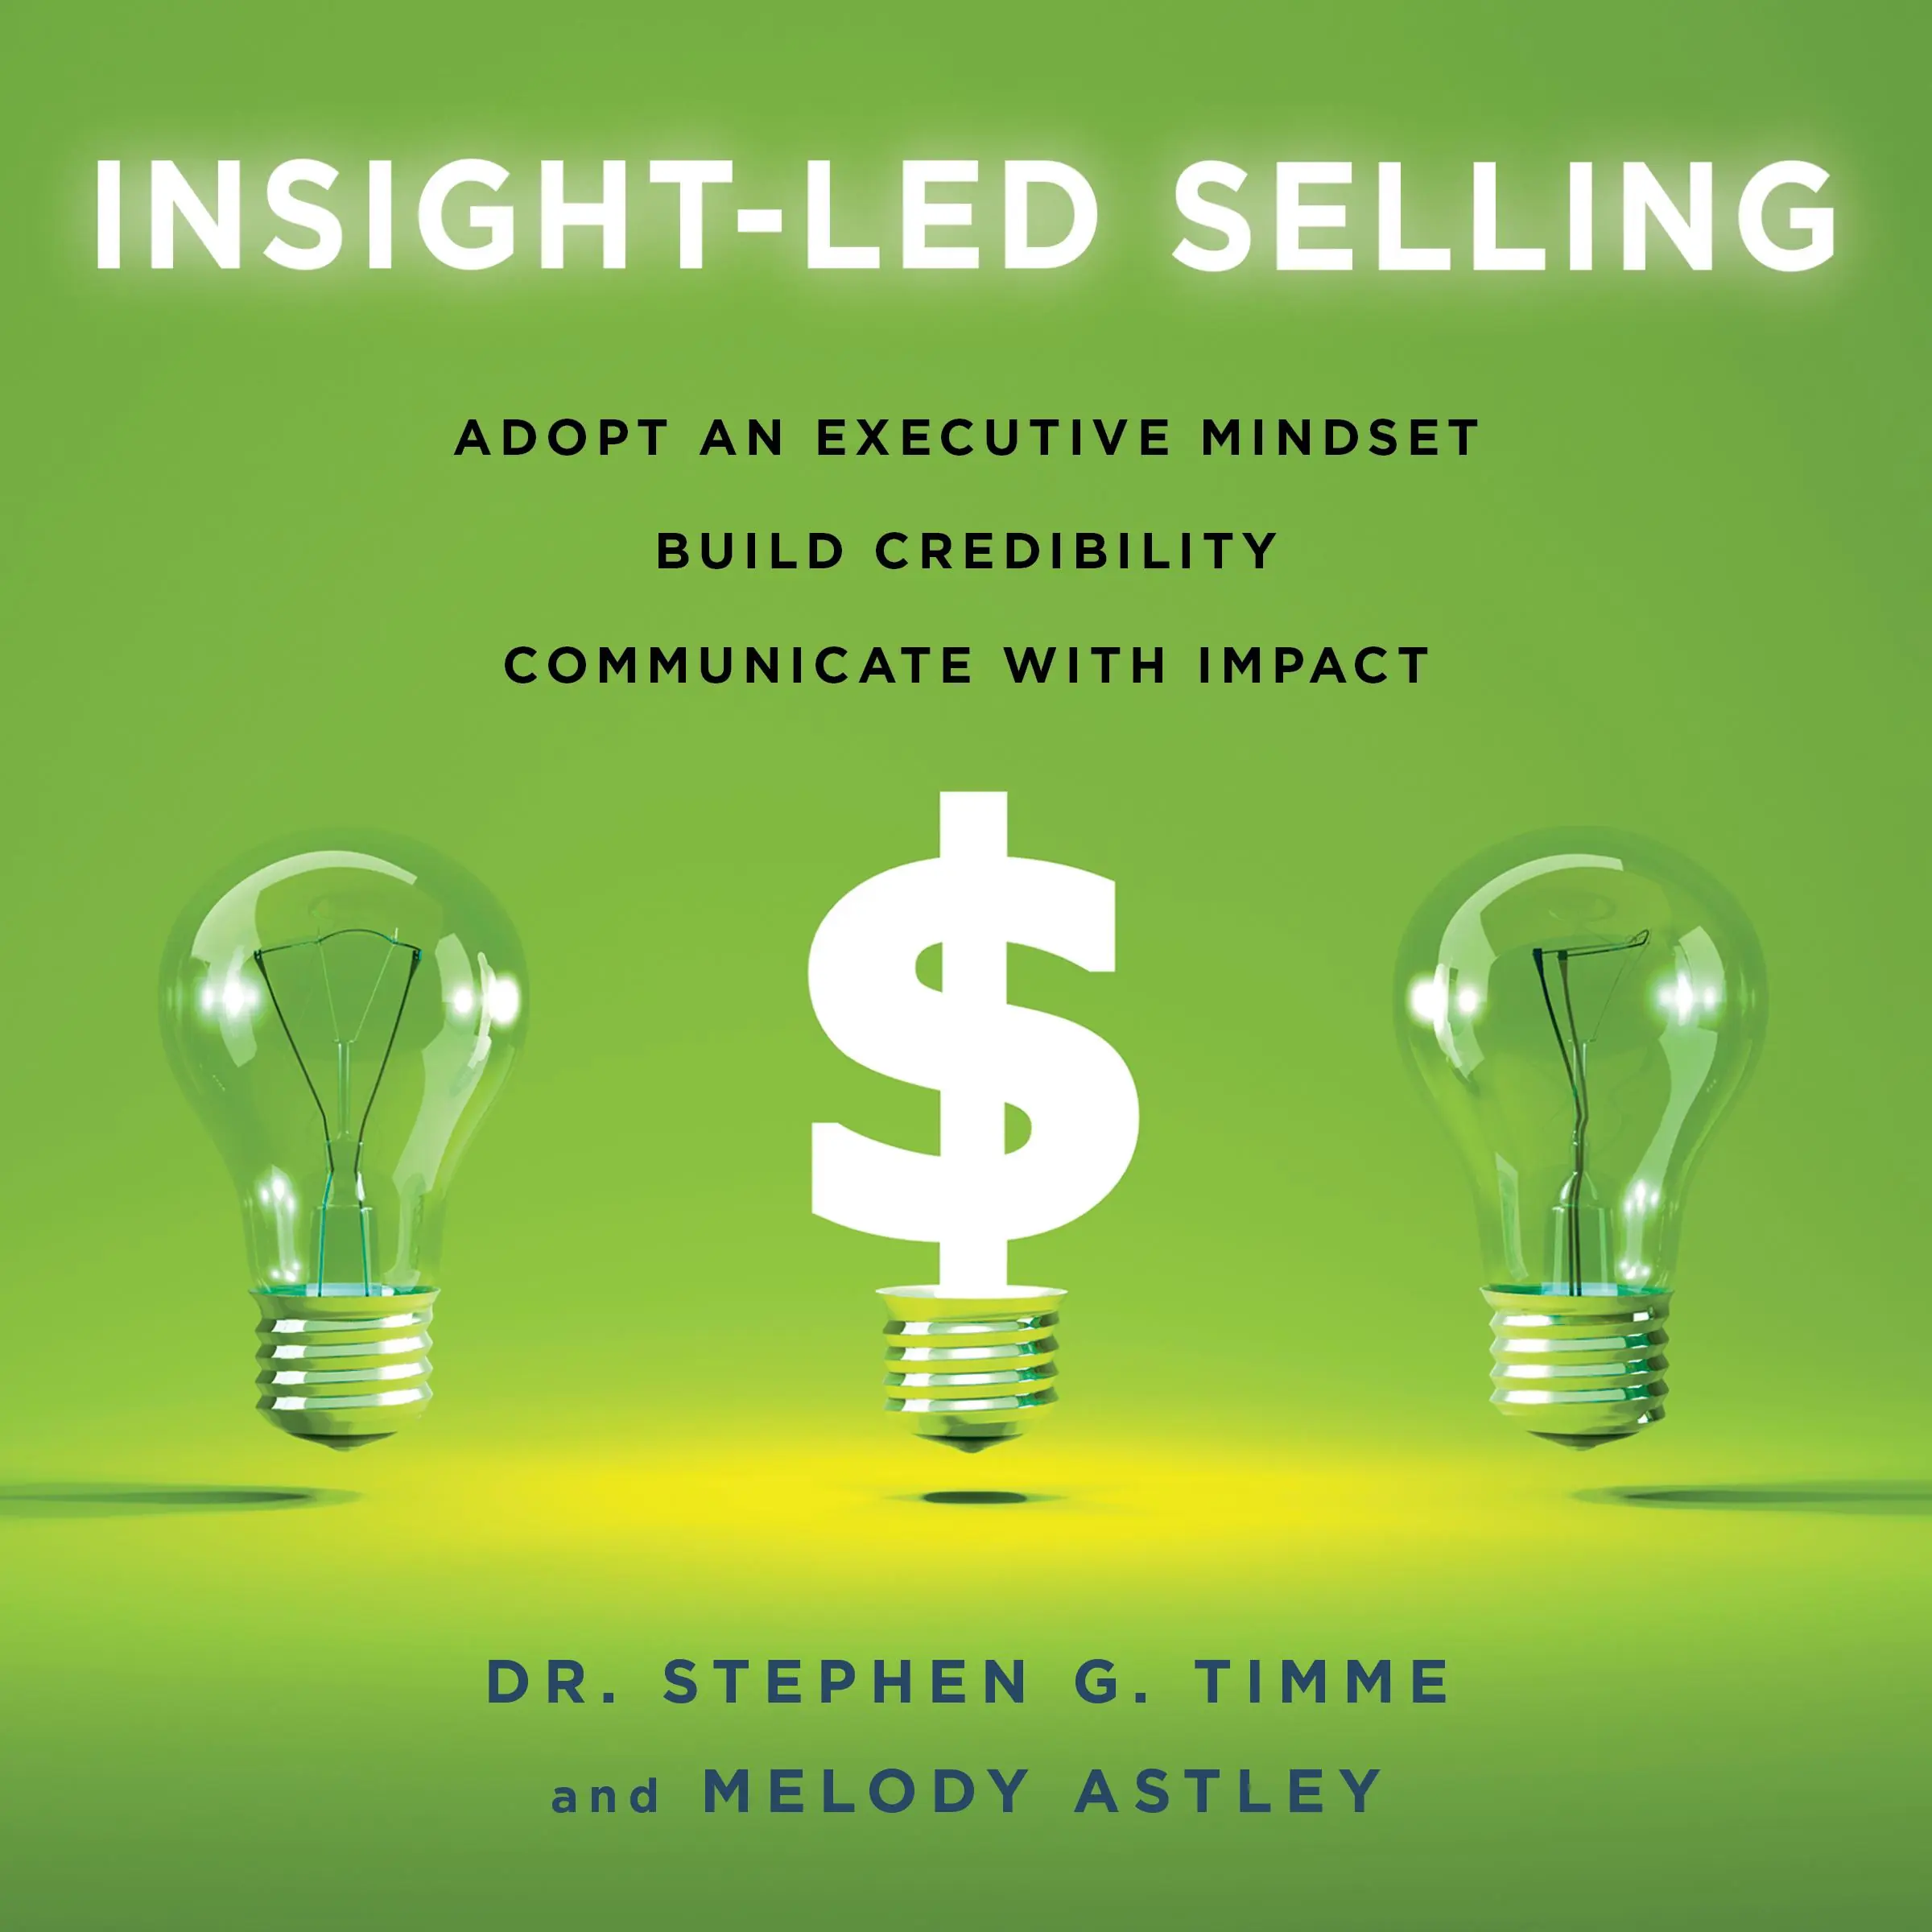 Insight-Led Selling Audiobook by Stephen Timme and Melody Astley